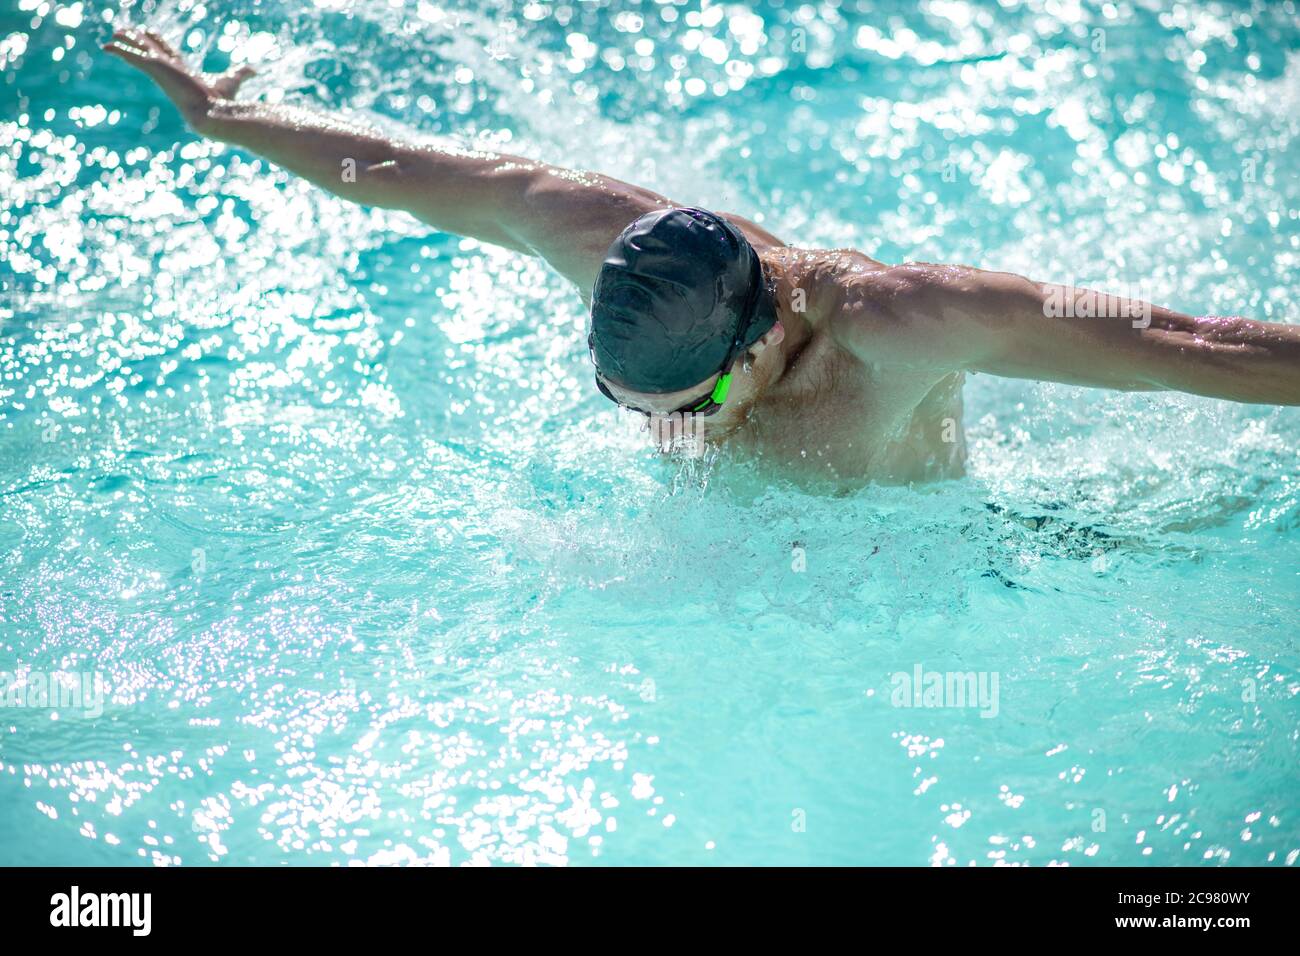 Man in swimming cap having a workout in pool Stock Photo